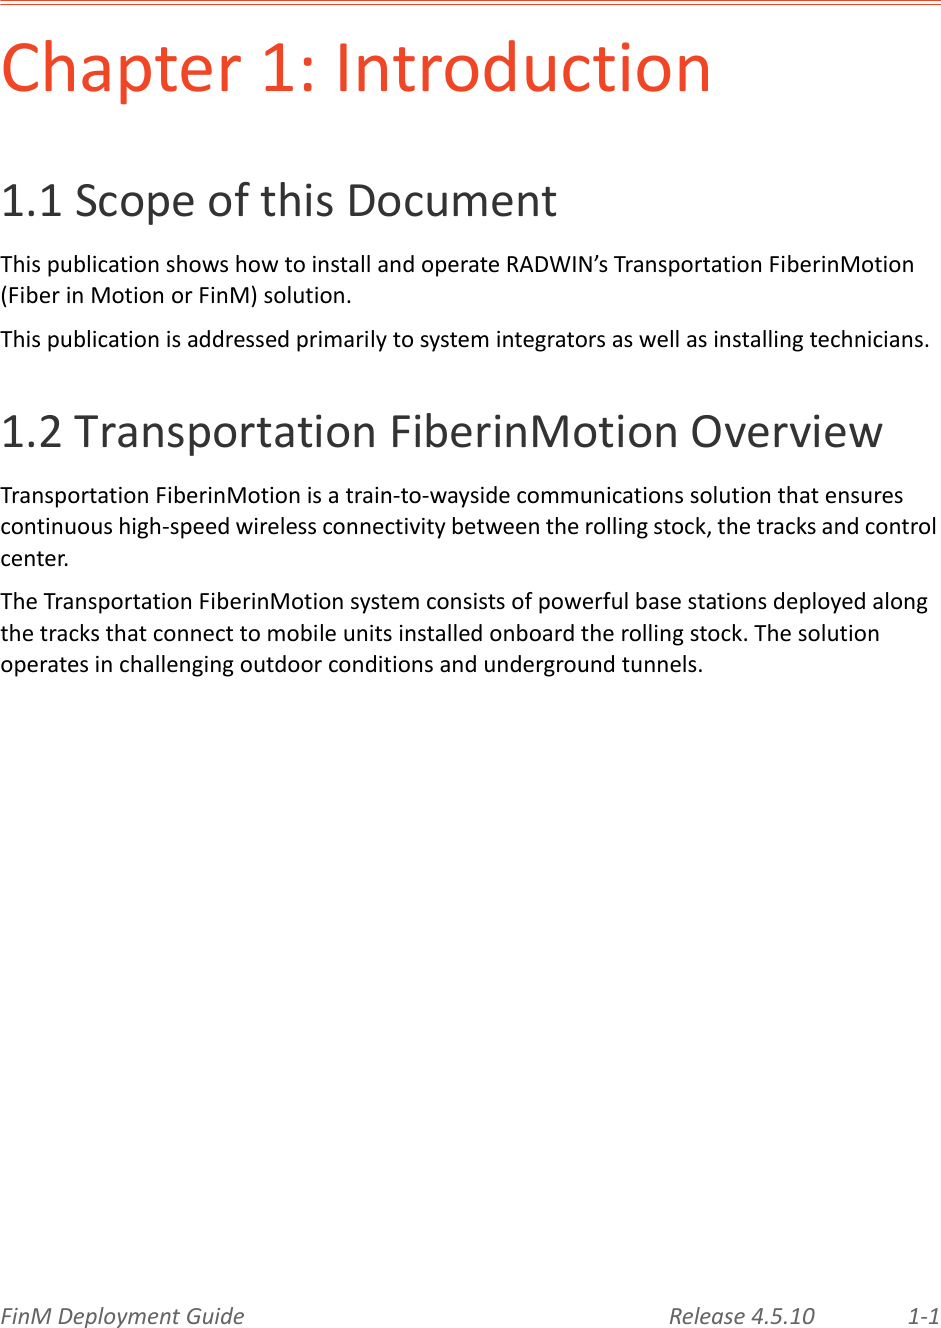 FinMDeploymentGuide Release4.5.10 1‐1Chapter1:Introduction1.1ScopeofthisDocumentThispublicationshowshowtoinstallandoperateRADWIN’sTransportationFiberinMotion(FiberinMotionorFinM)solution.Thispublicationisaddressedprimarilytosystemintegratorsaswellasinstallingtechnicians.1.2TransportationFiberinMotionOverviewTransportationFiberinMotionisatrain‐to‐waysidecommunicationssolutionthatensurescontinuoushigh‐speedwirelessconnectivitybetweentherollingstock,thetracksandcontrolcenter.TheTransportationFiberinMotionsystemconsistsofpowerfulbasestationsdeployedalongthetracksthatconnecttomobileunitsinstalledonboardtherollingstock.Thesolutionoperatesinchallengingoutdoorconditionsandundergroundtunnels.